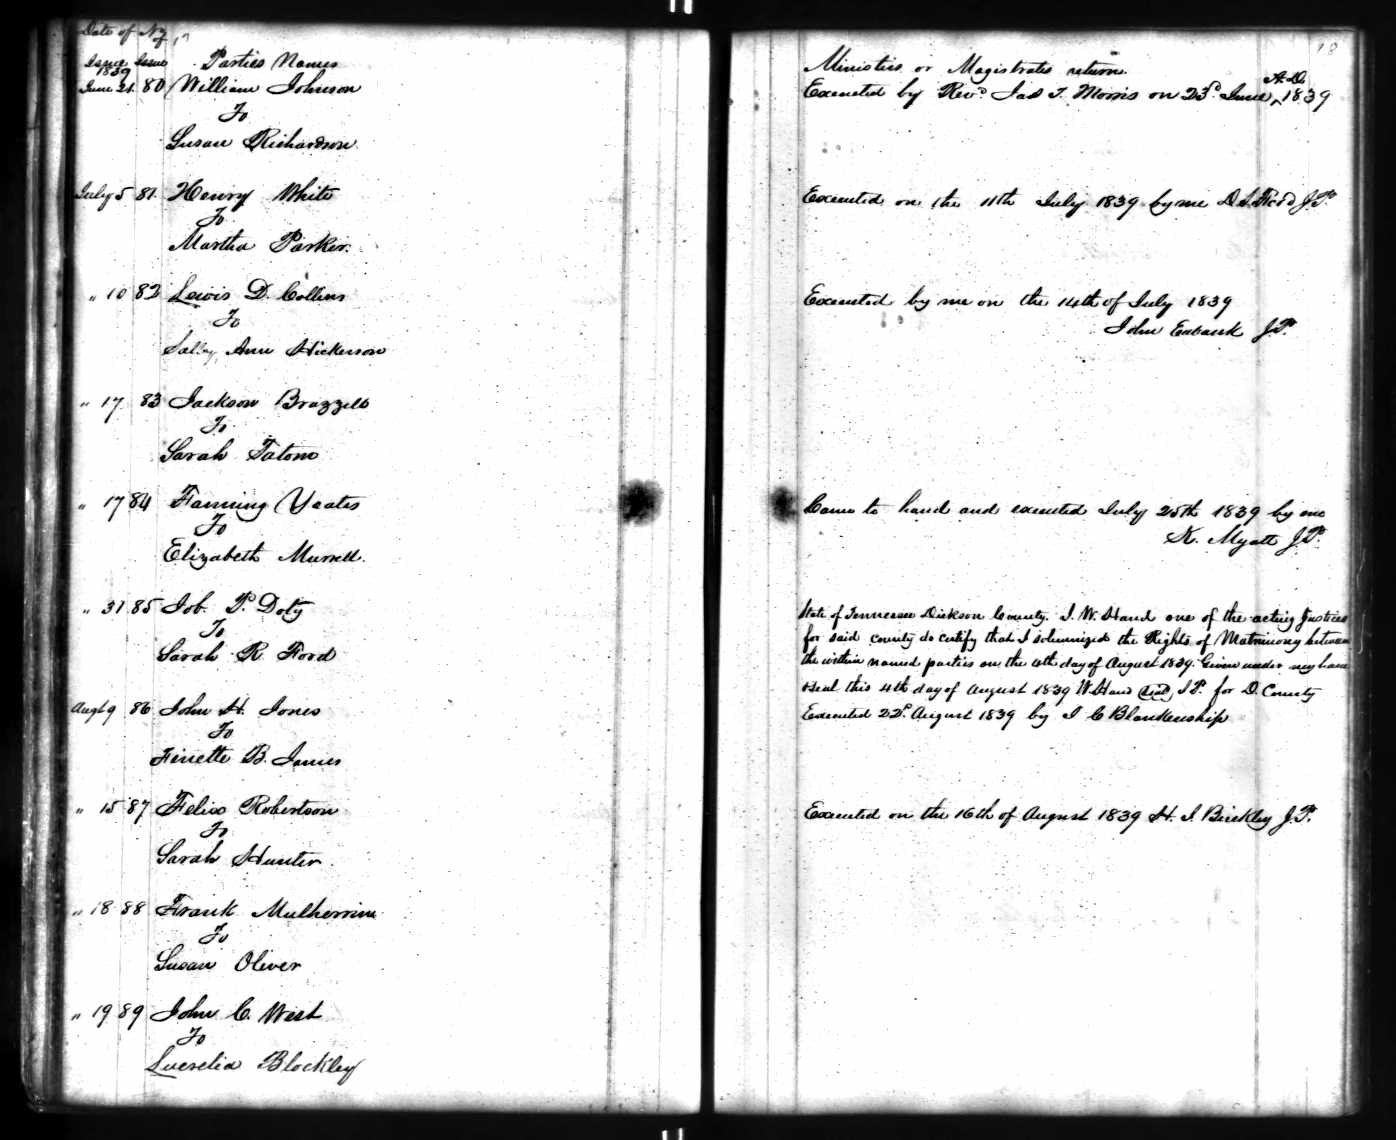 Marriage license and return, Richmond Brazzell and Ancy Evans, 1838, Dickson County, Tennessee